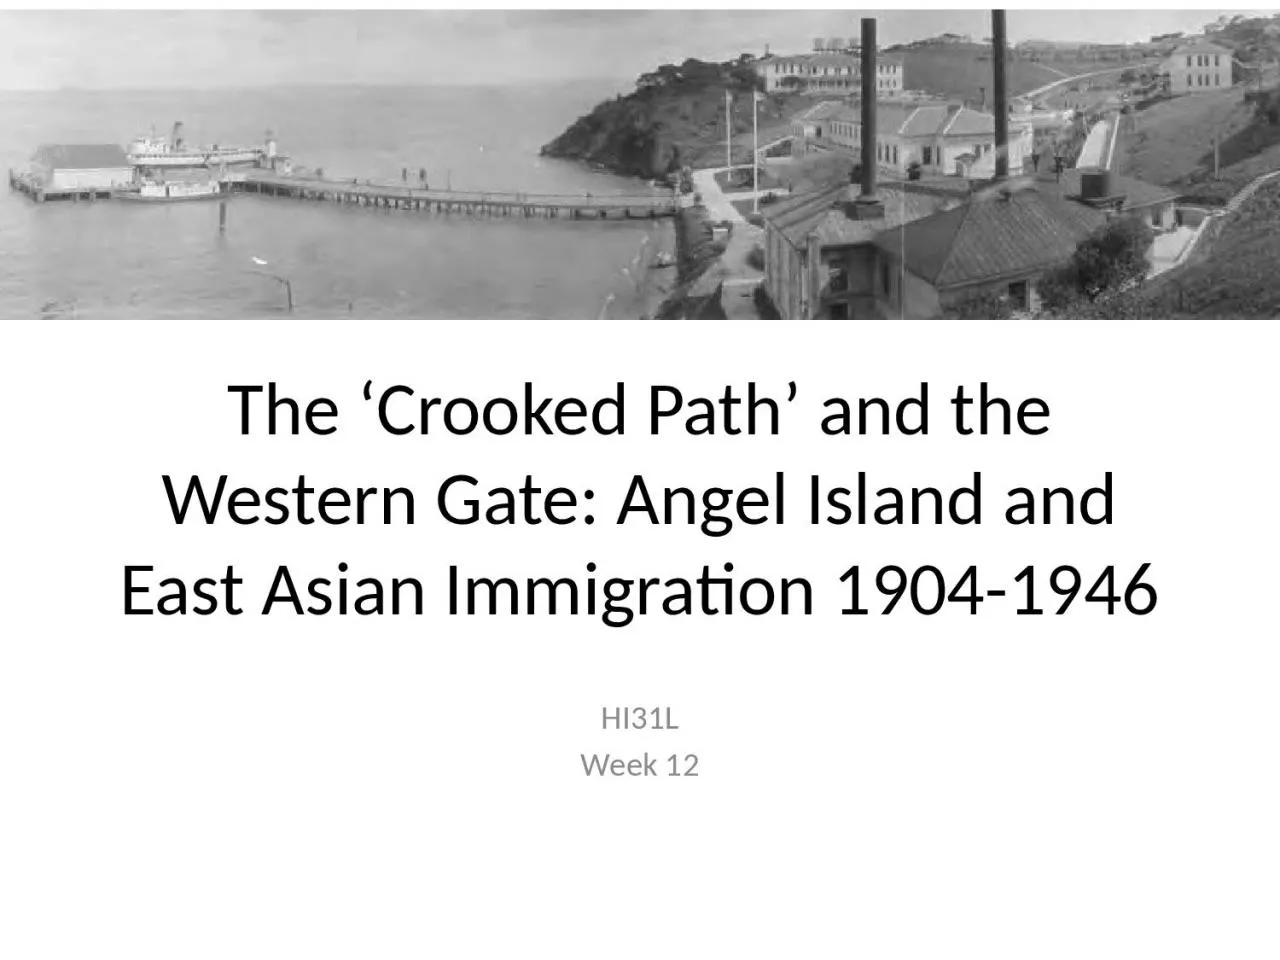 The ‘Crooked Path’ and the Western Gate: Angel Island and